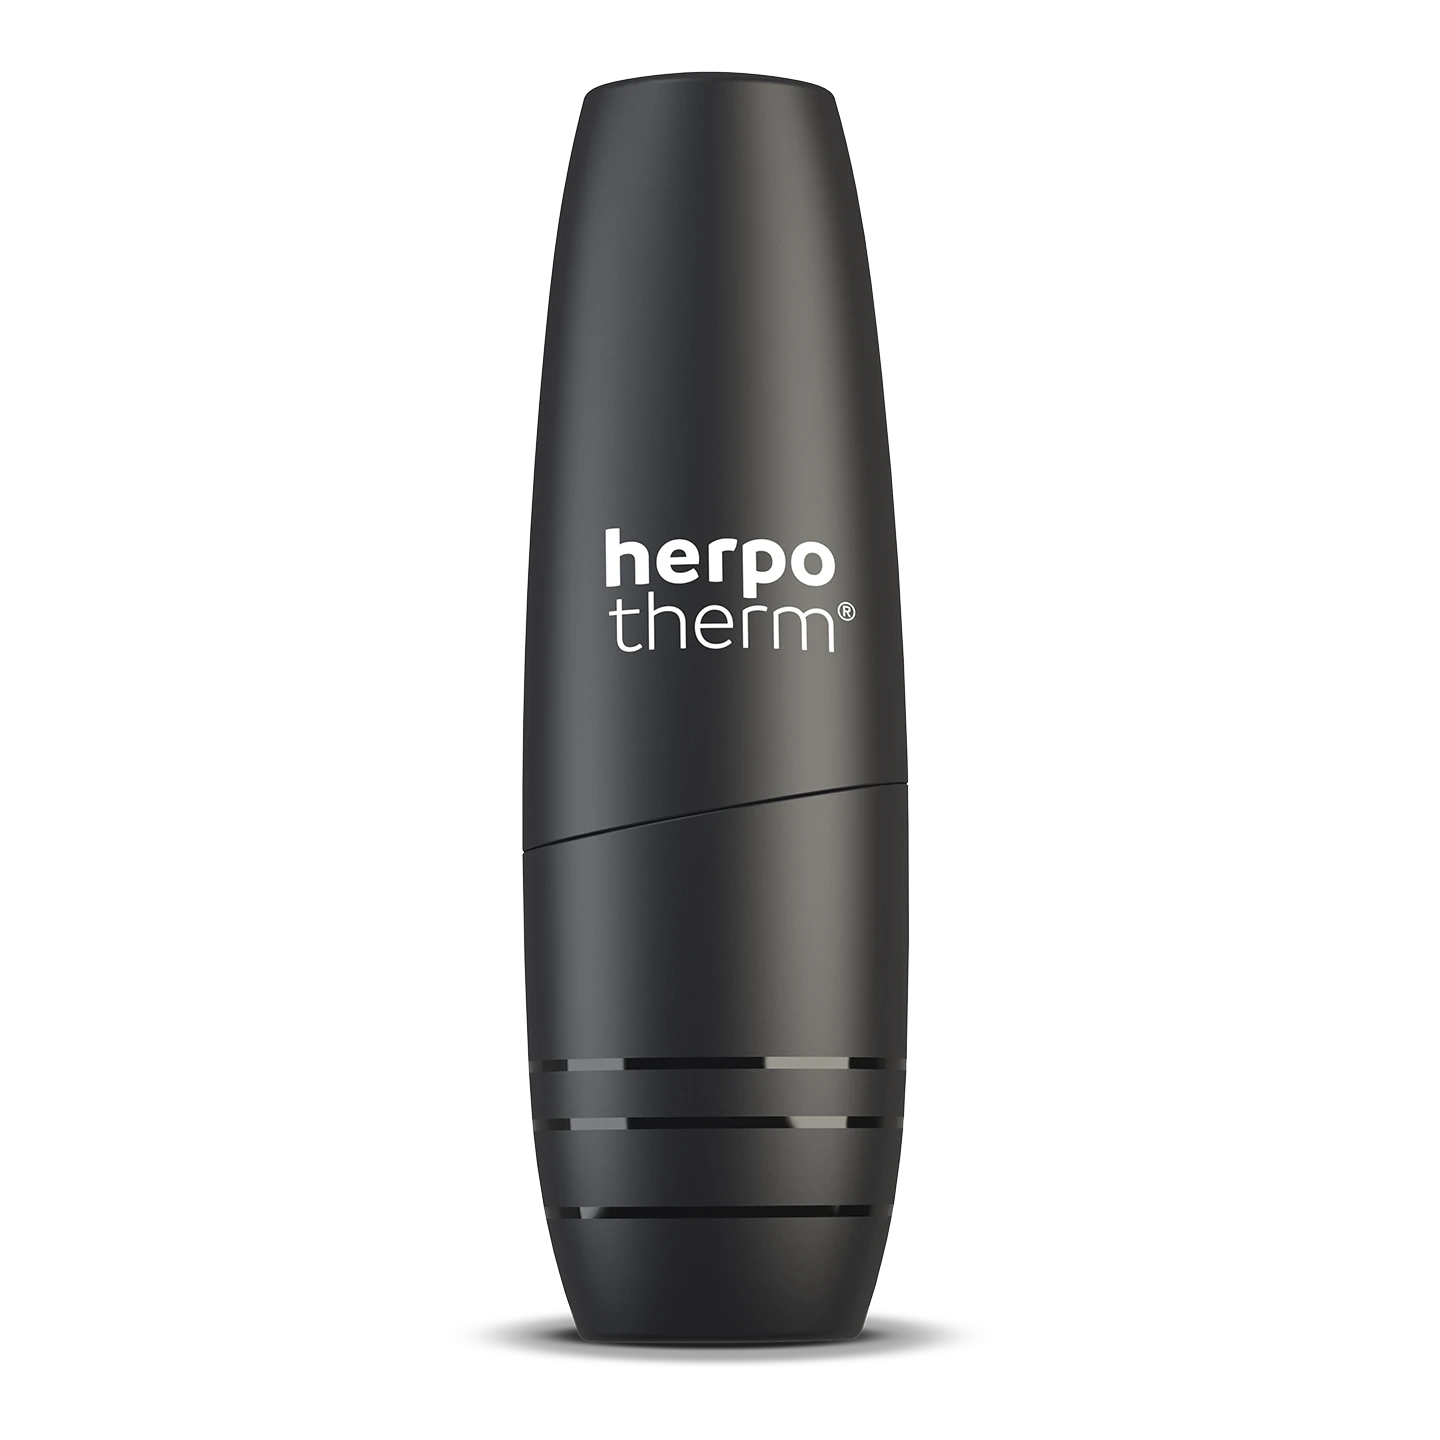 herpotherm neo frontal closed